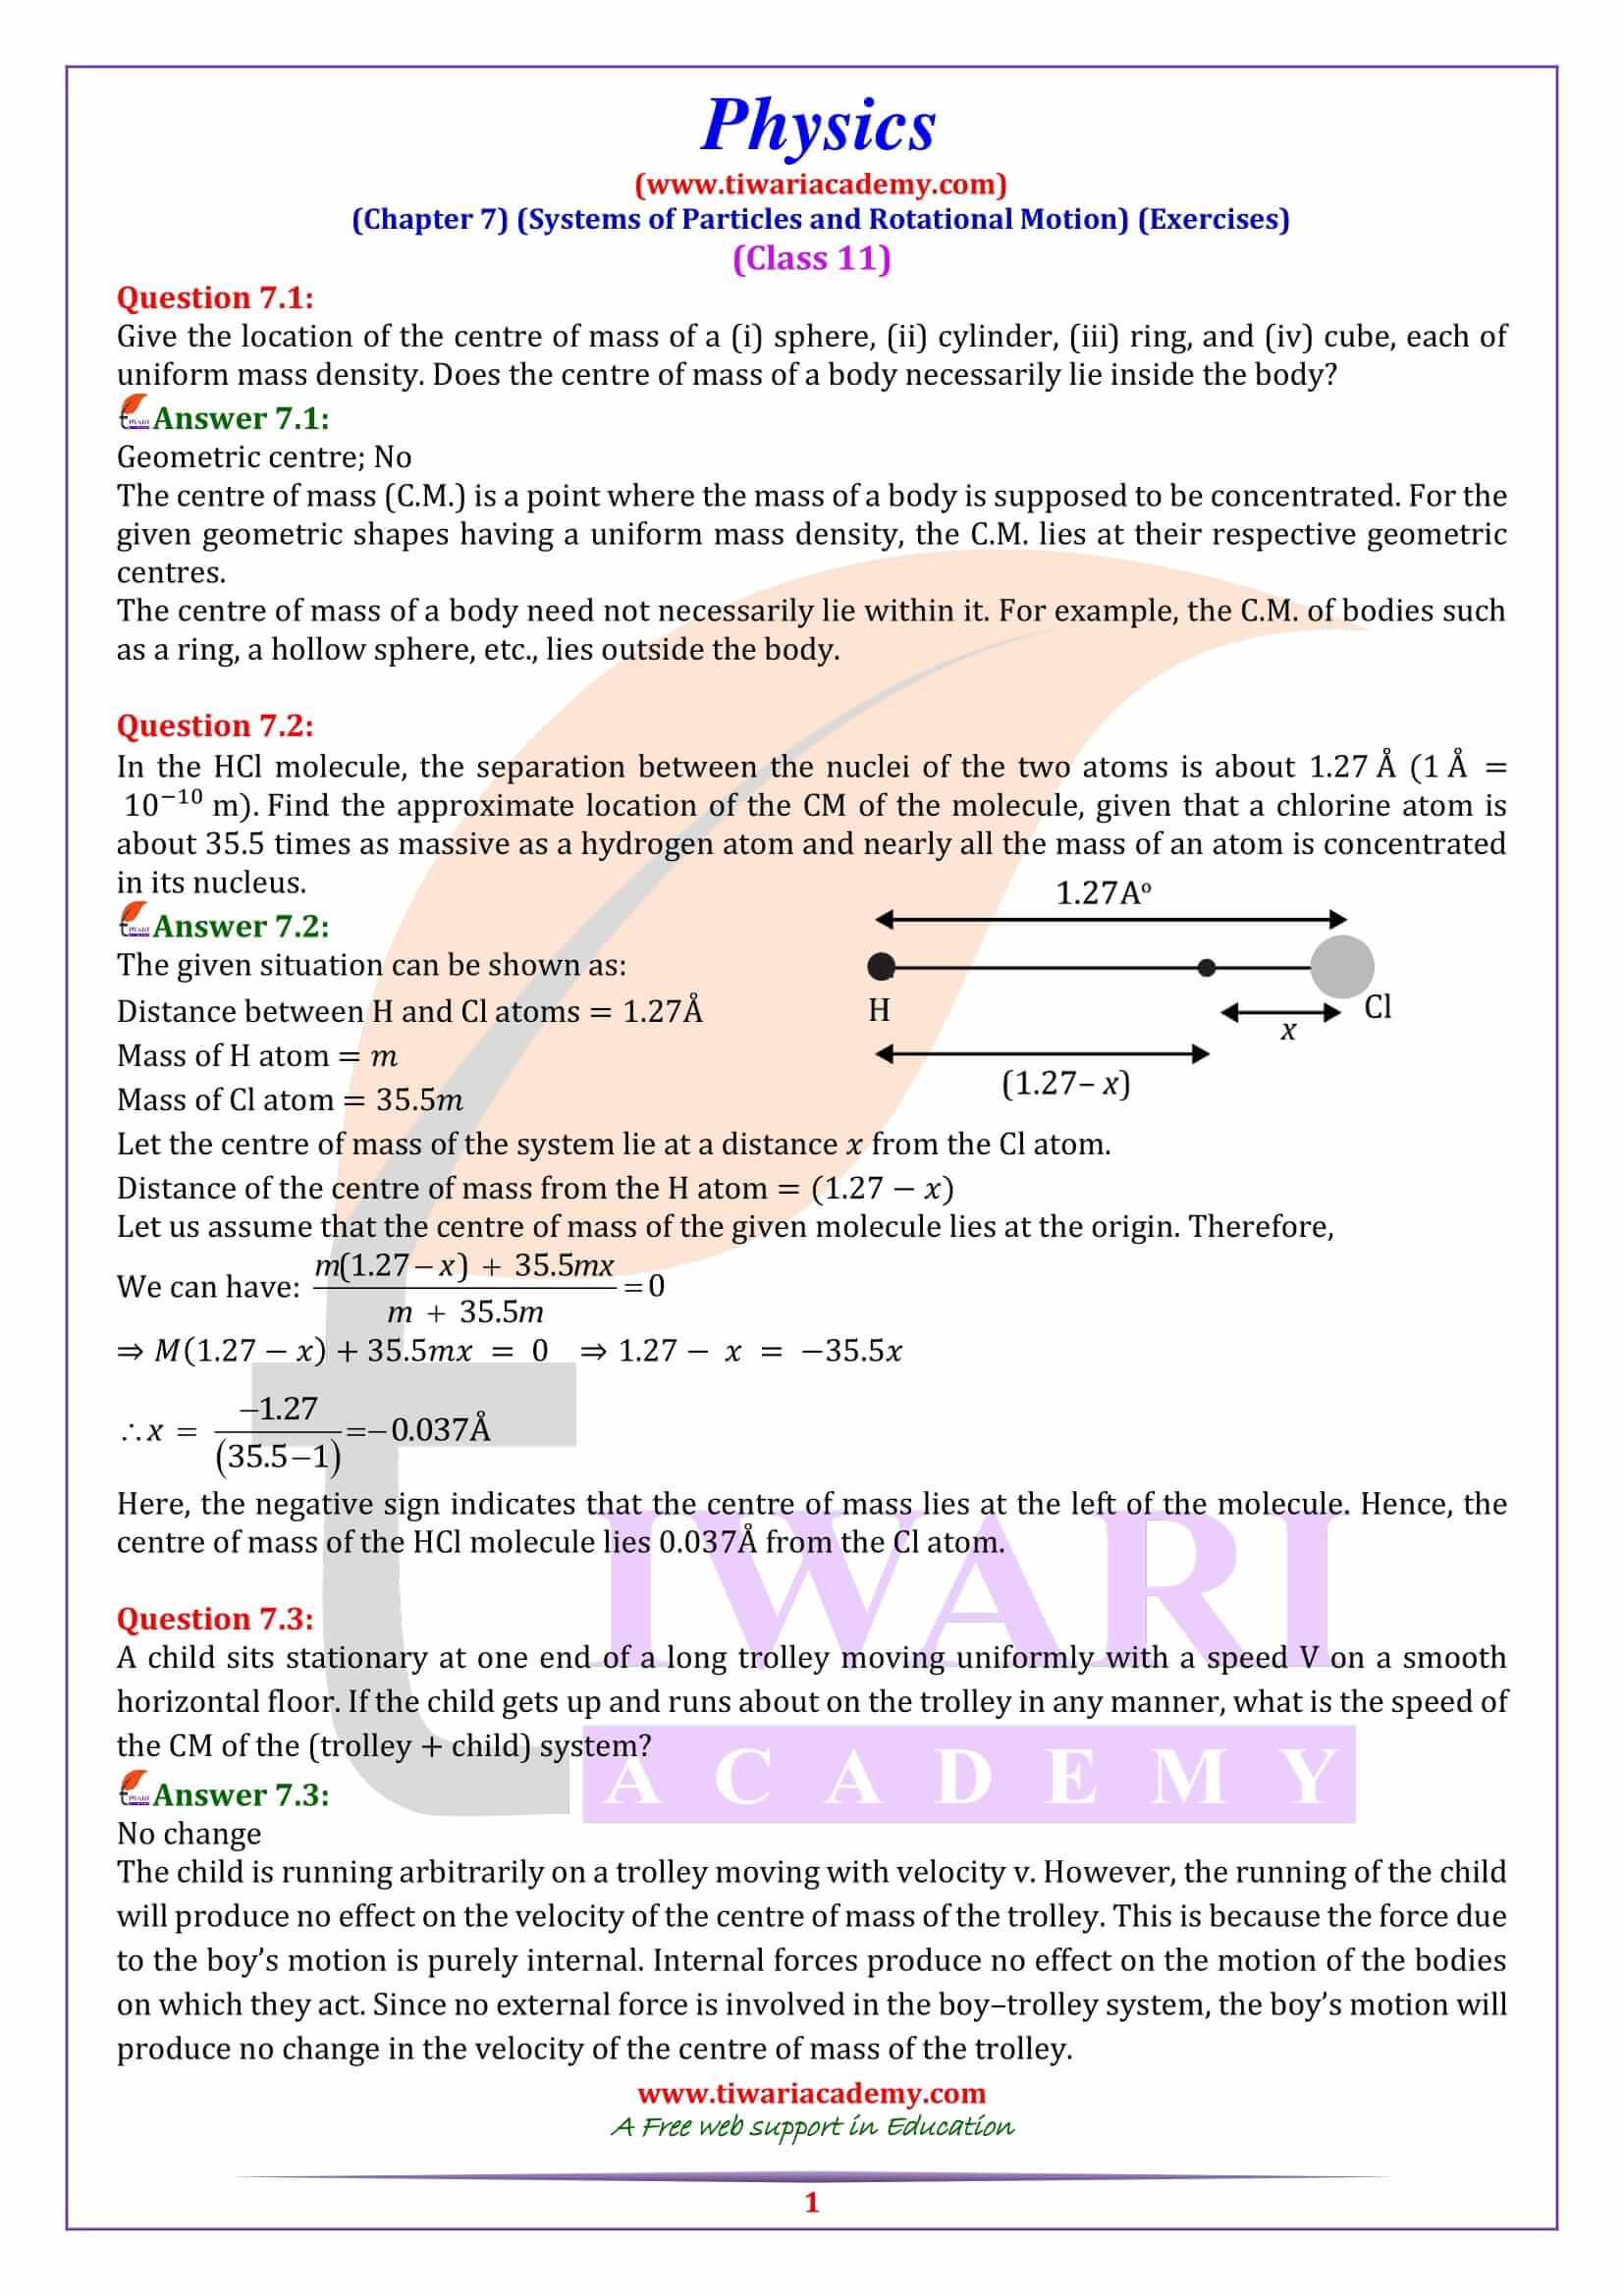 Class 11 Physics Chapter 7 Exercises